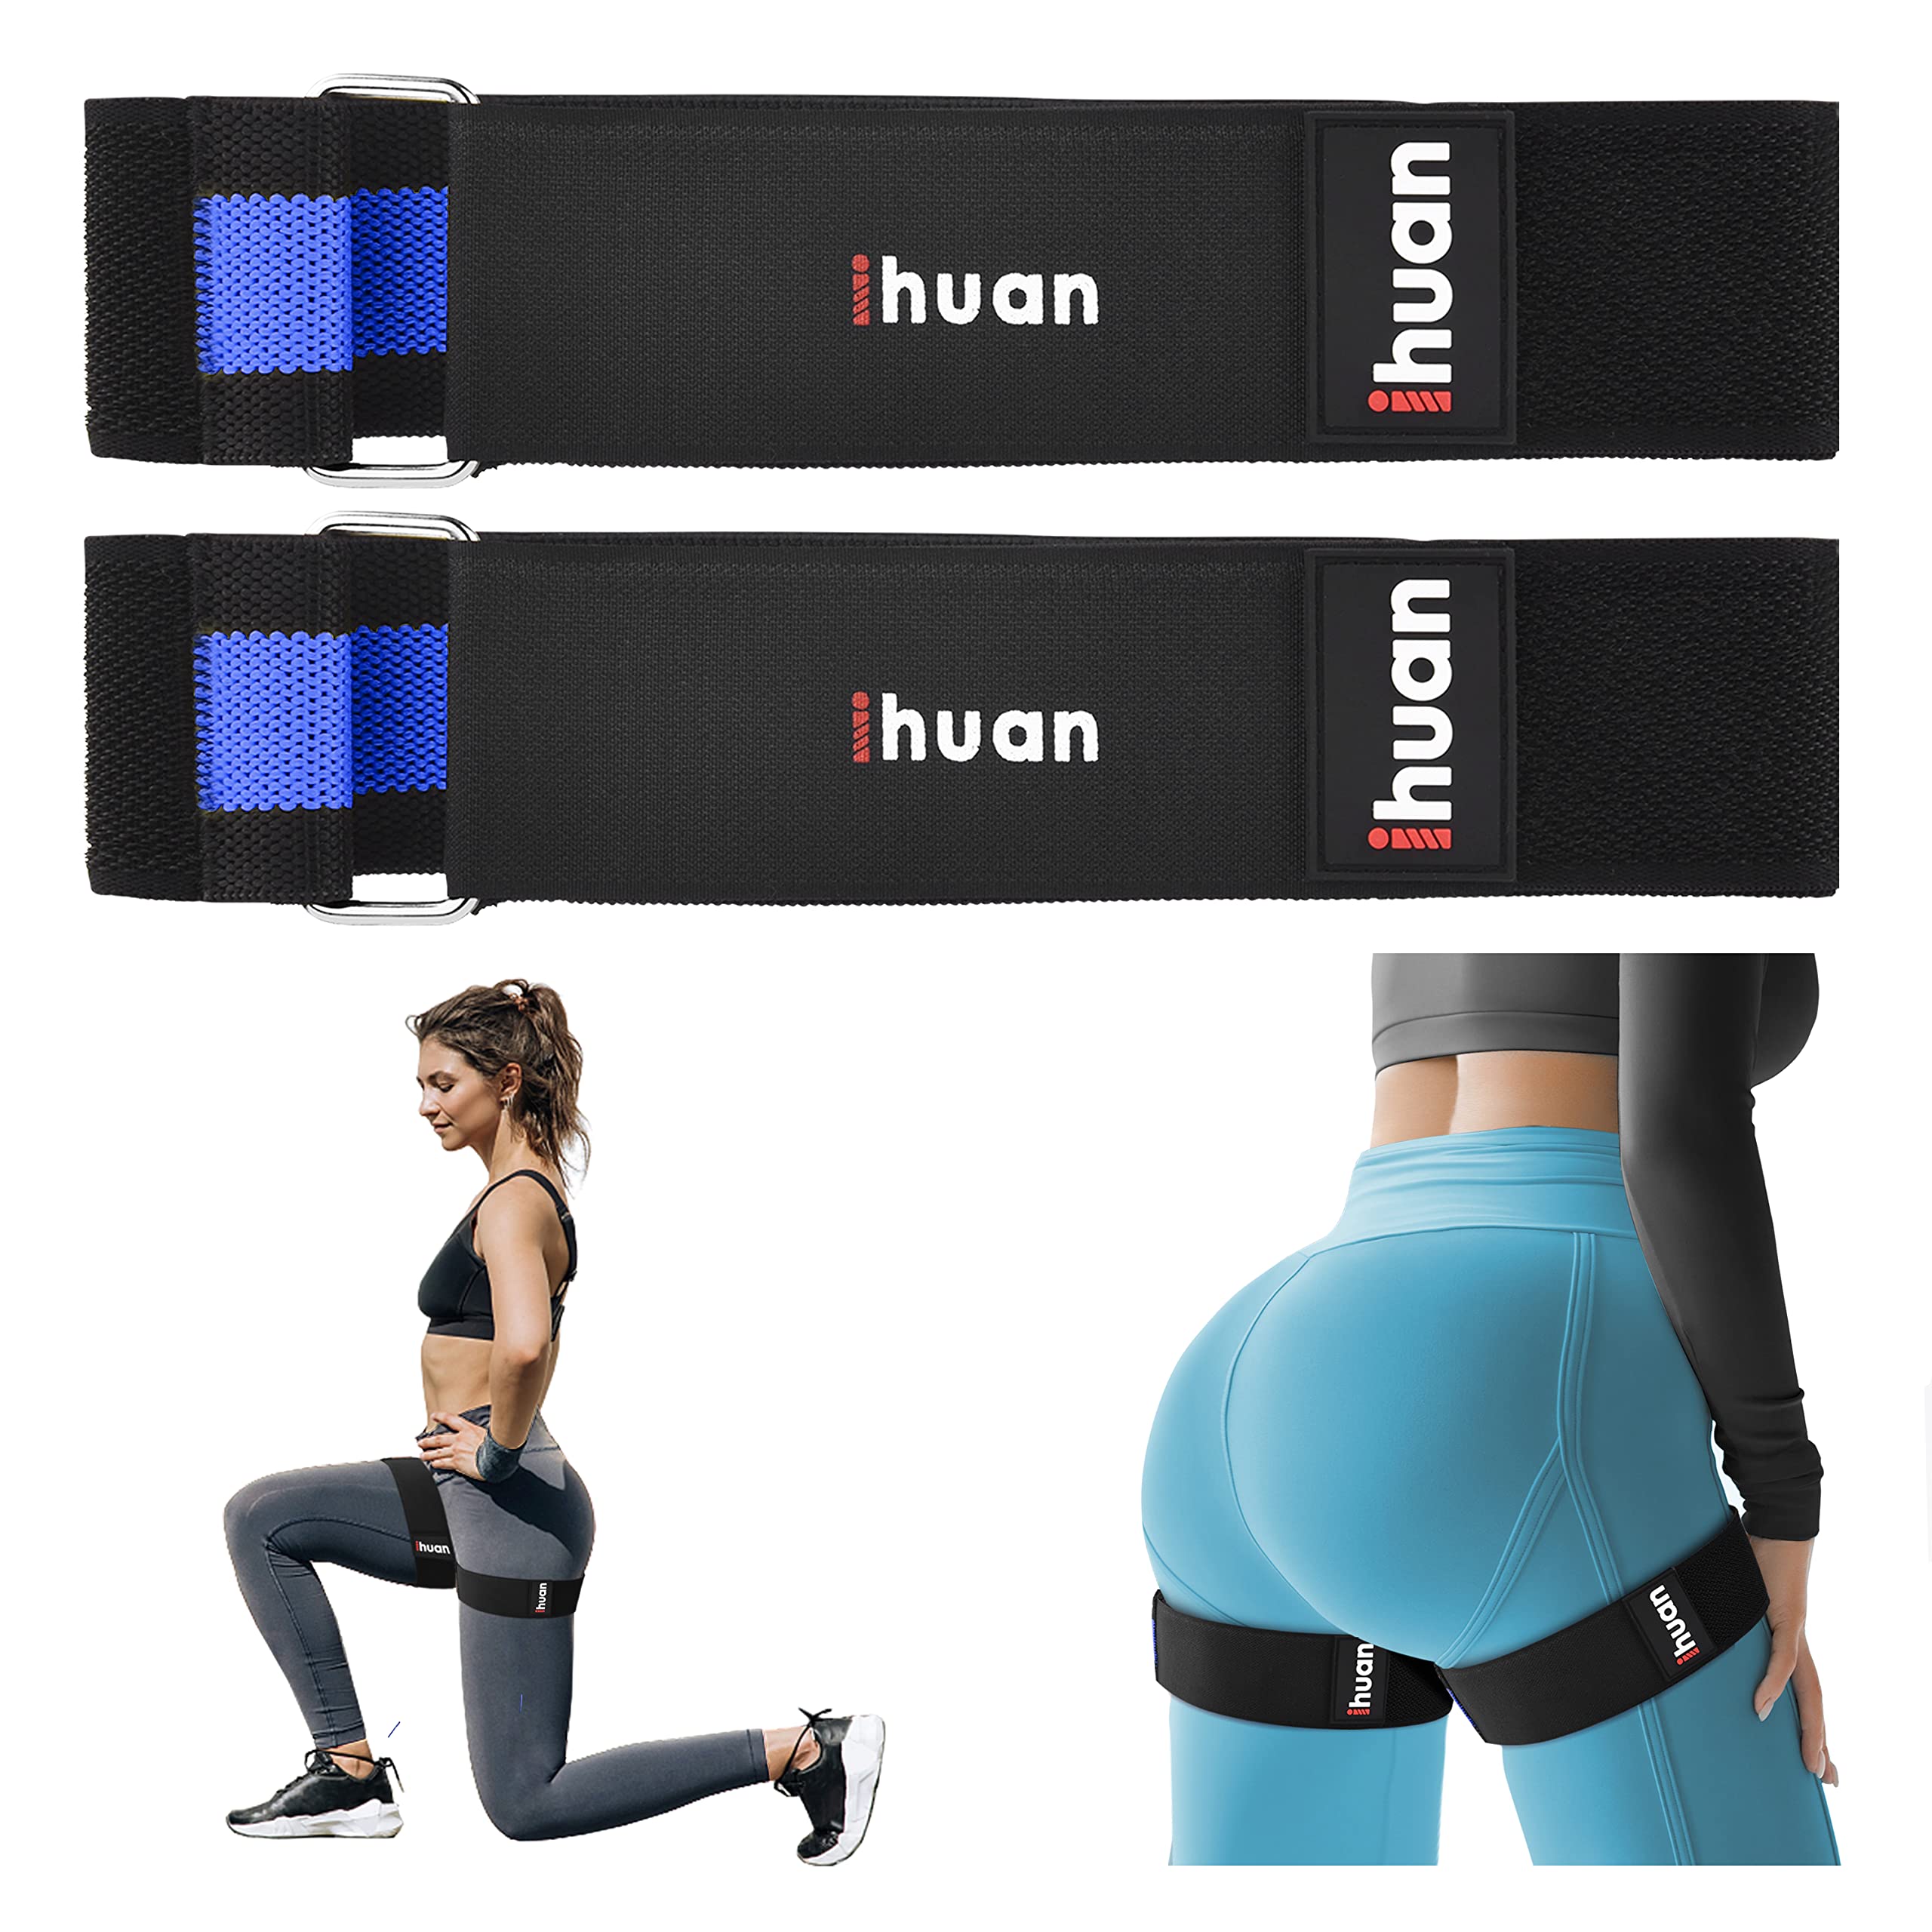 ihuan Blood Flow Restriction Bands for Women-Booty: BFR Bands for Women  Glutes, Thigh Straps for Workout, Booty Bands for Butt Lift, Occlusion Bands  for Leg and Butt Black+Blue